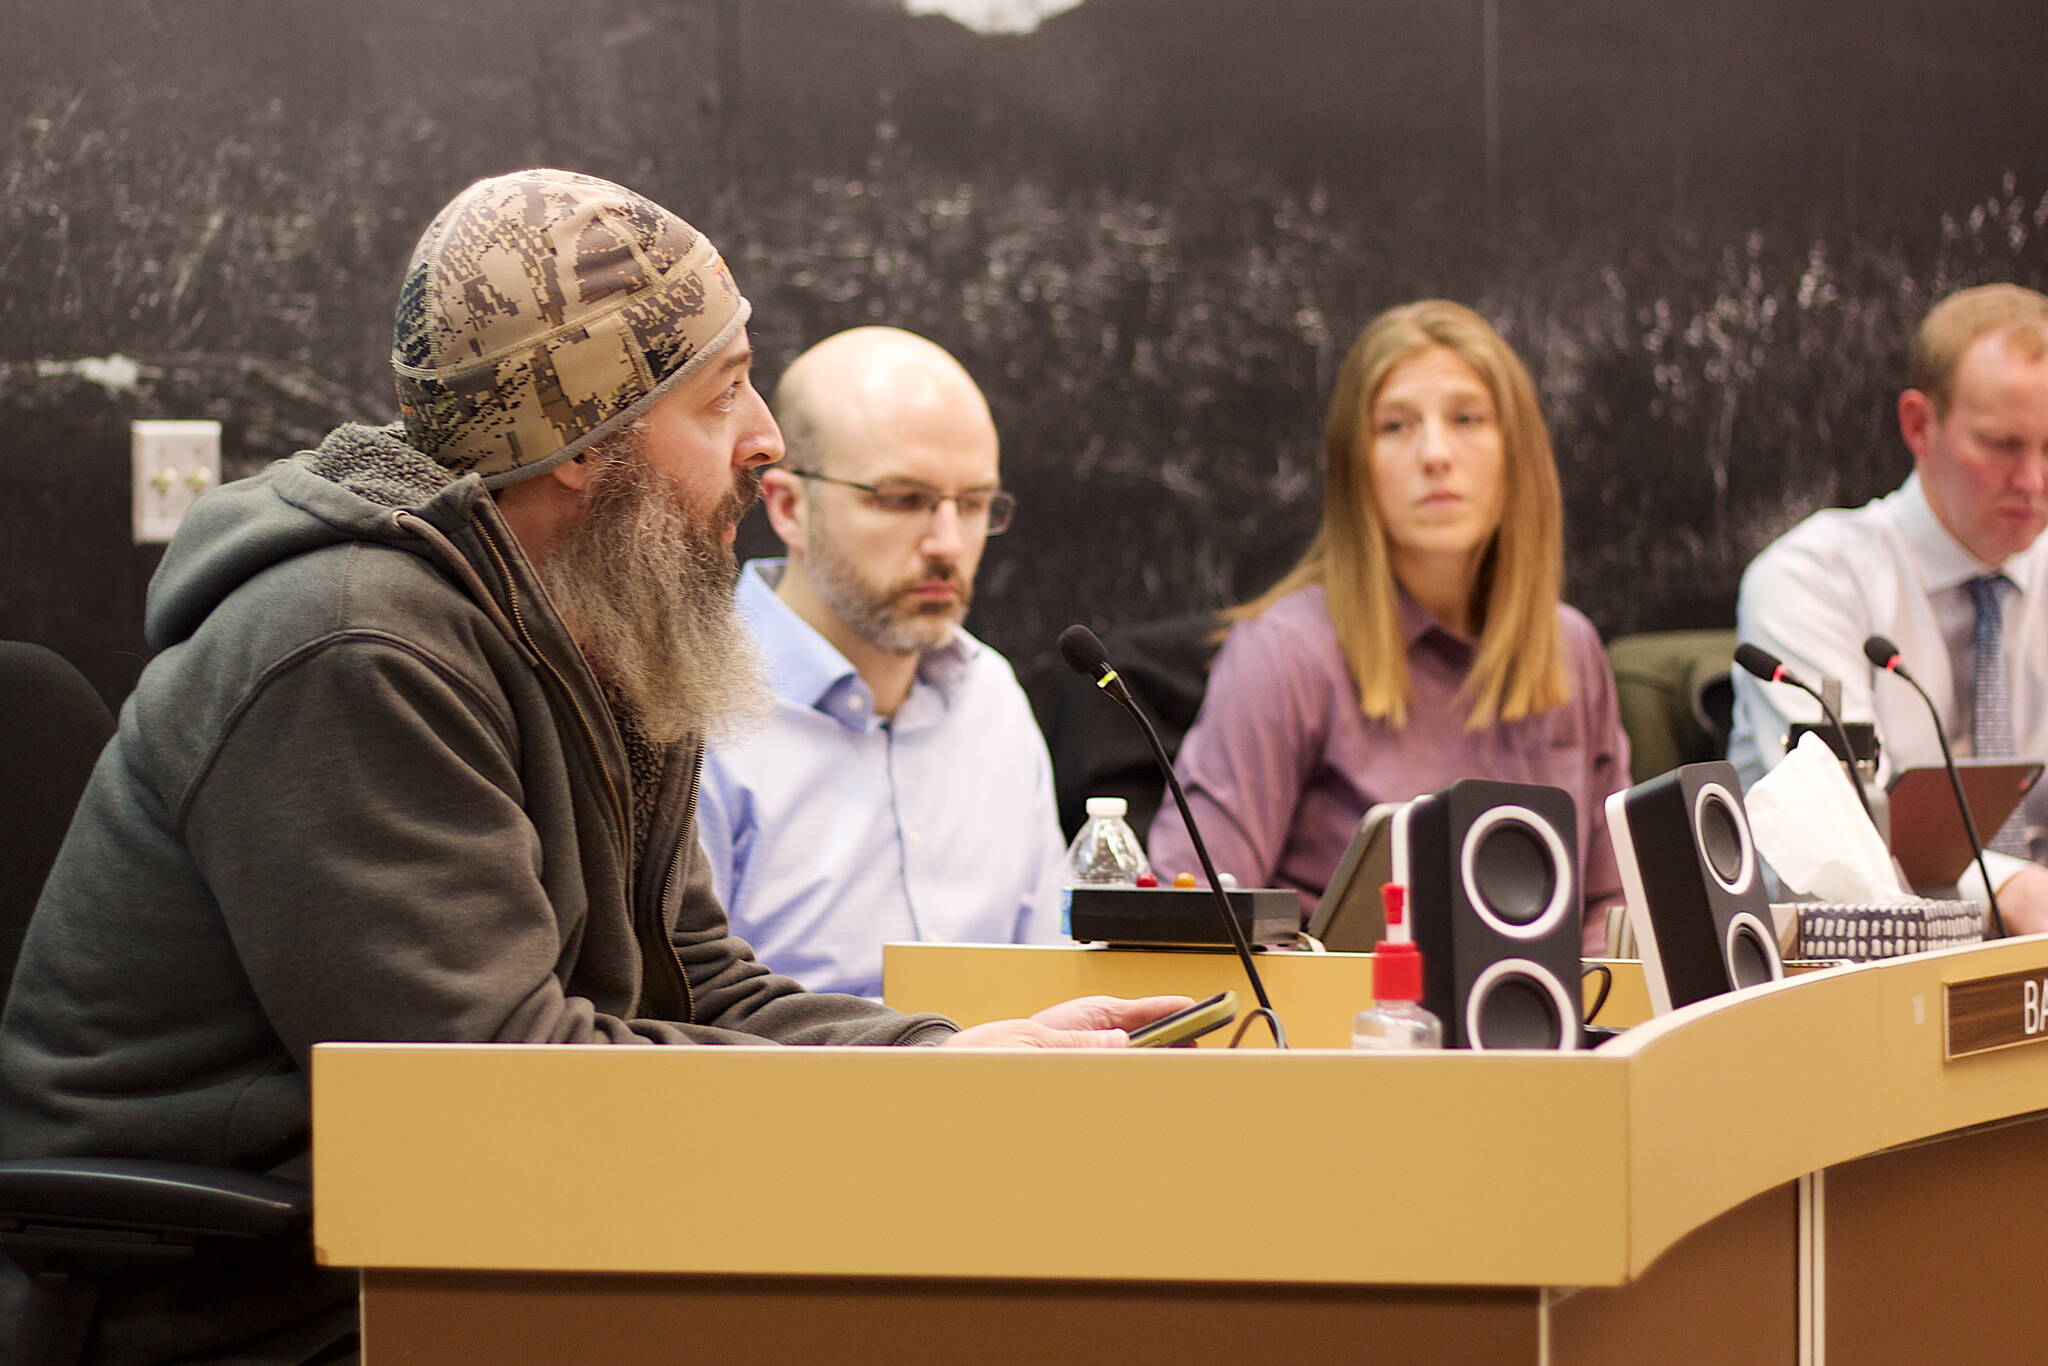 Shane Krause, left, who lives aboard a boat in Juneau, testifies in opposition to a 9% increase in docks and harbor fees during an Assembly meeting on Monday night as Deputy City Manager Robert Barr, City Manager Katie Koester and City Attorney Robert Palmer listen. (Mark Sabbatini / Juneau Empire)